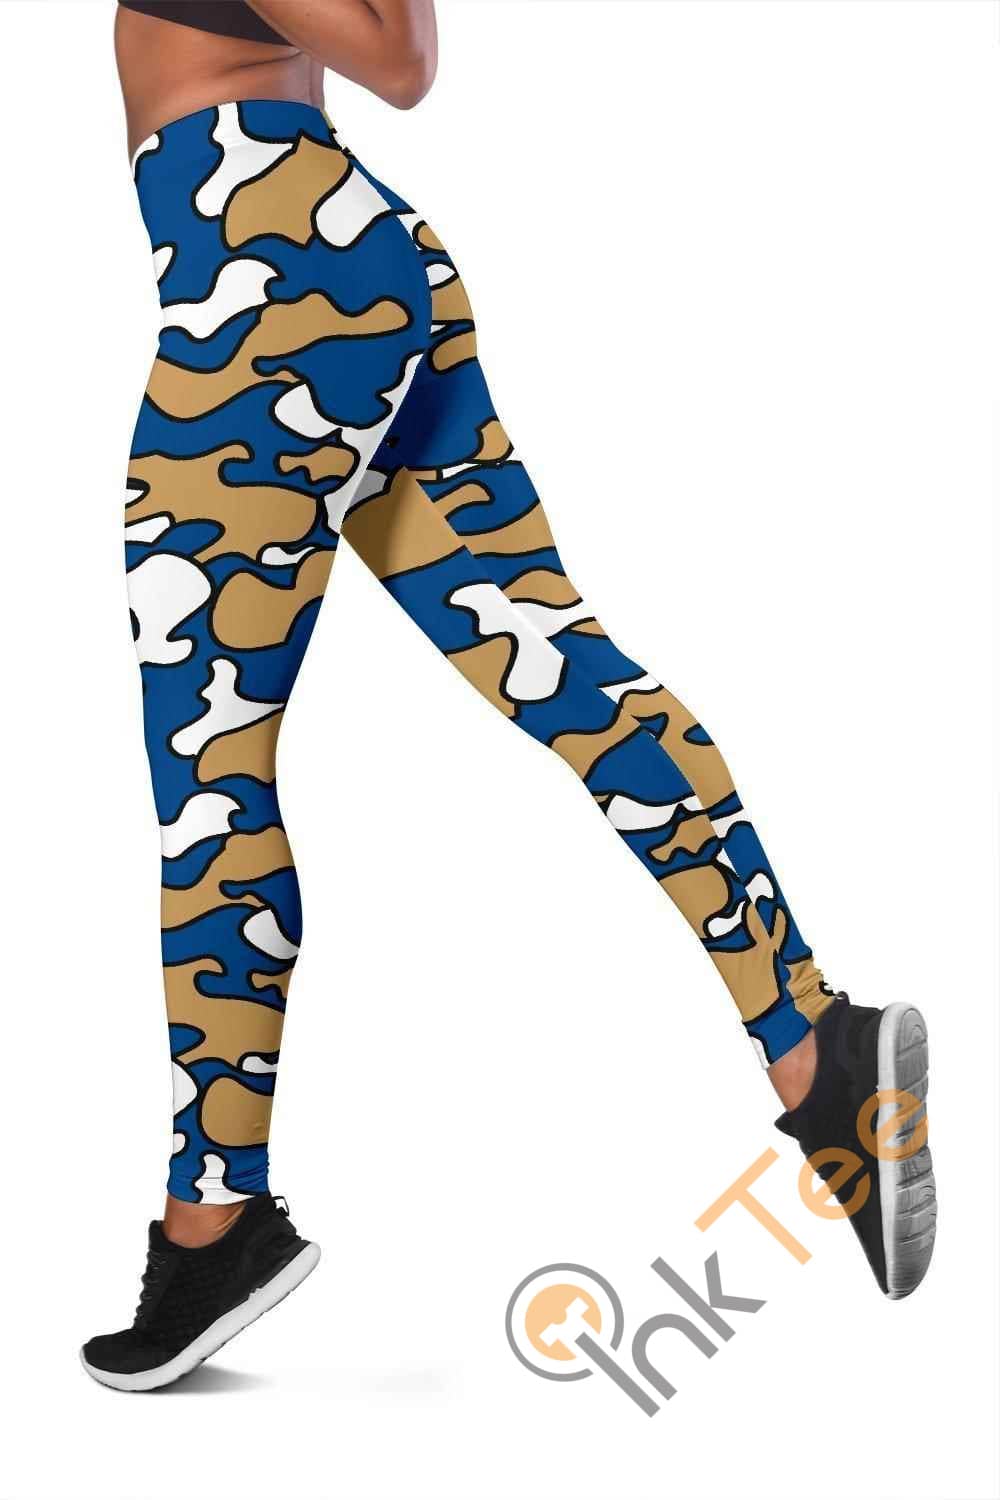 Inktee Store - Kansas City Royals Inspired Tru Camo 3D All Over Print For Yoga Fitness Fashion Women'S Leggings Image